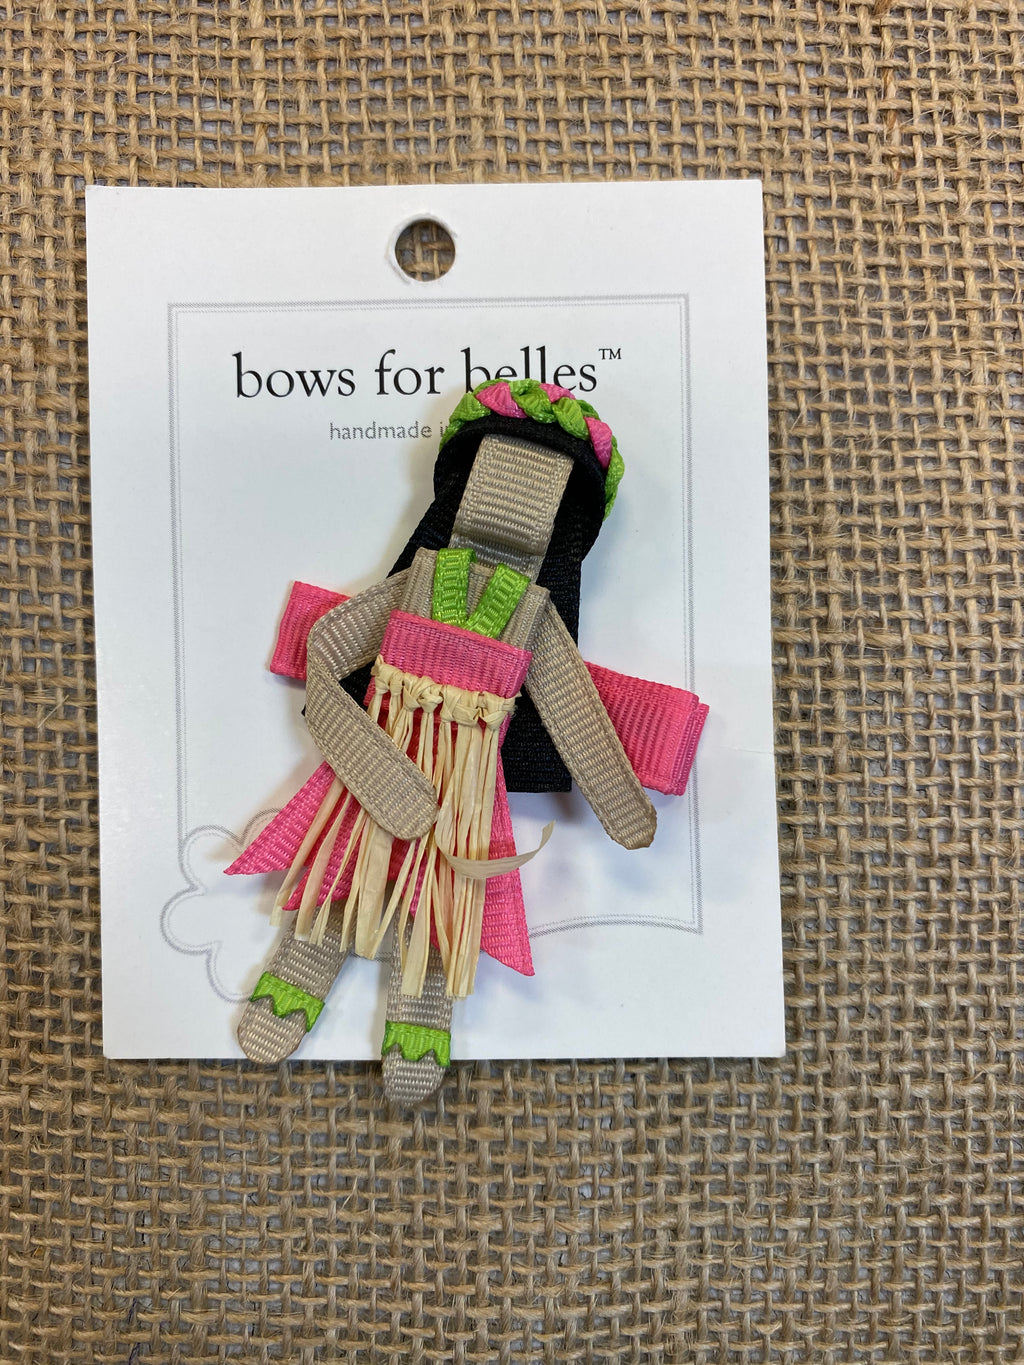 Bows for Belles Pink and Green Hula Girl